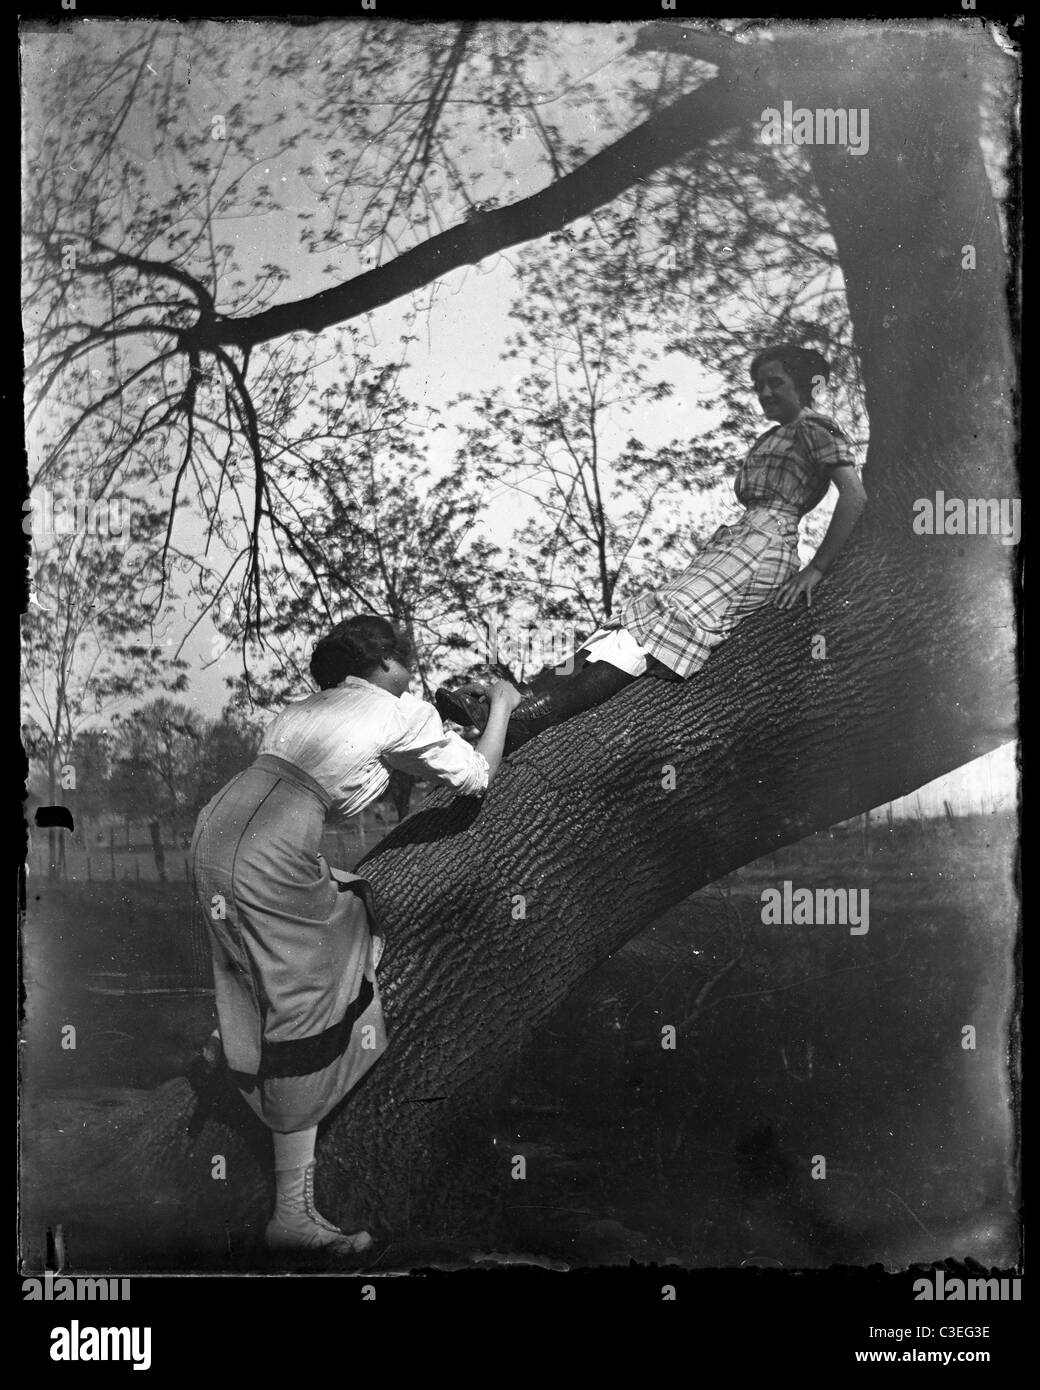 two womean playing on a tree victorian fashion women outdoors friends girlfriends 1890s Stock Photo